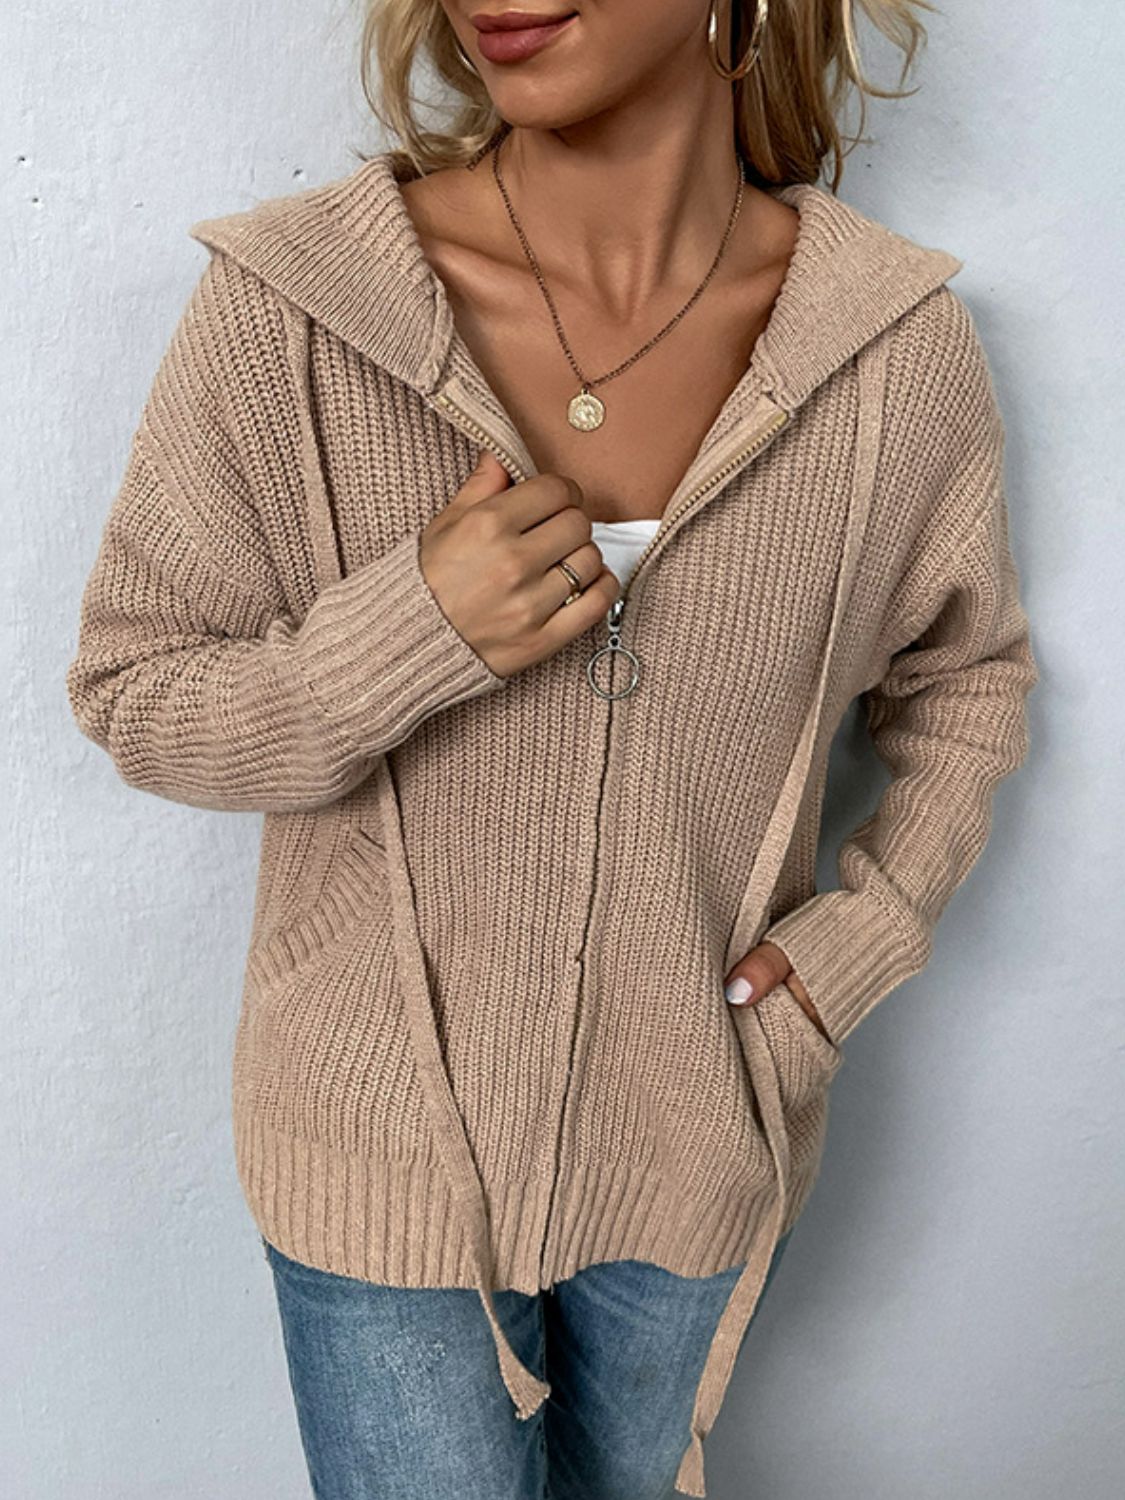 Zip-Up Drawstring Detail Hooded Cardigan - Women’s Clothing & Accessories - Shirts & Tops - 3 - 2024